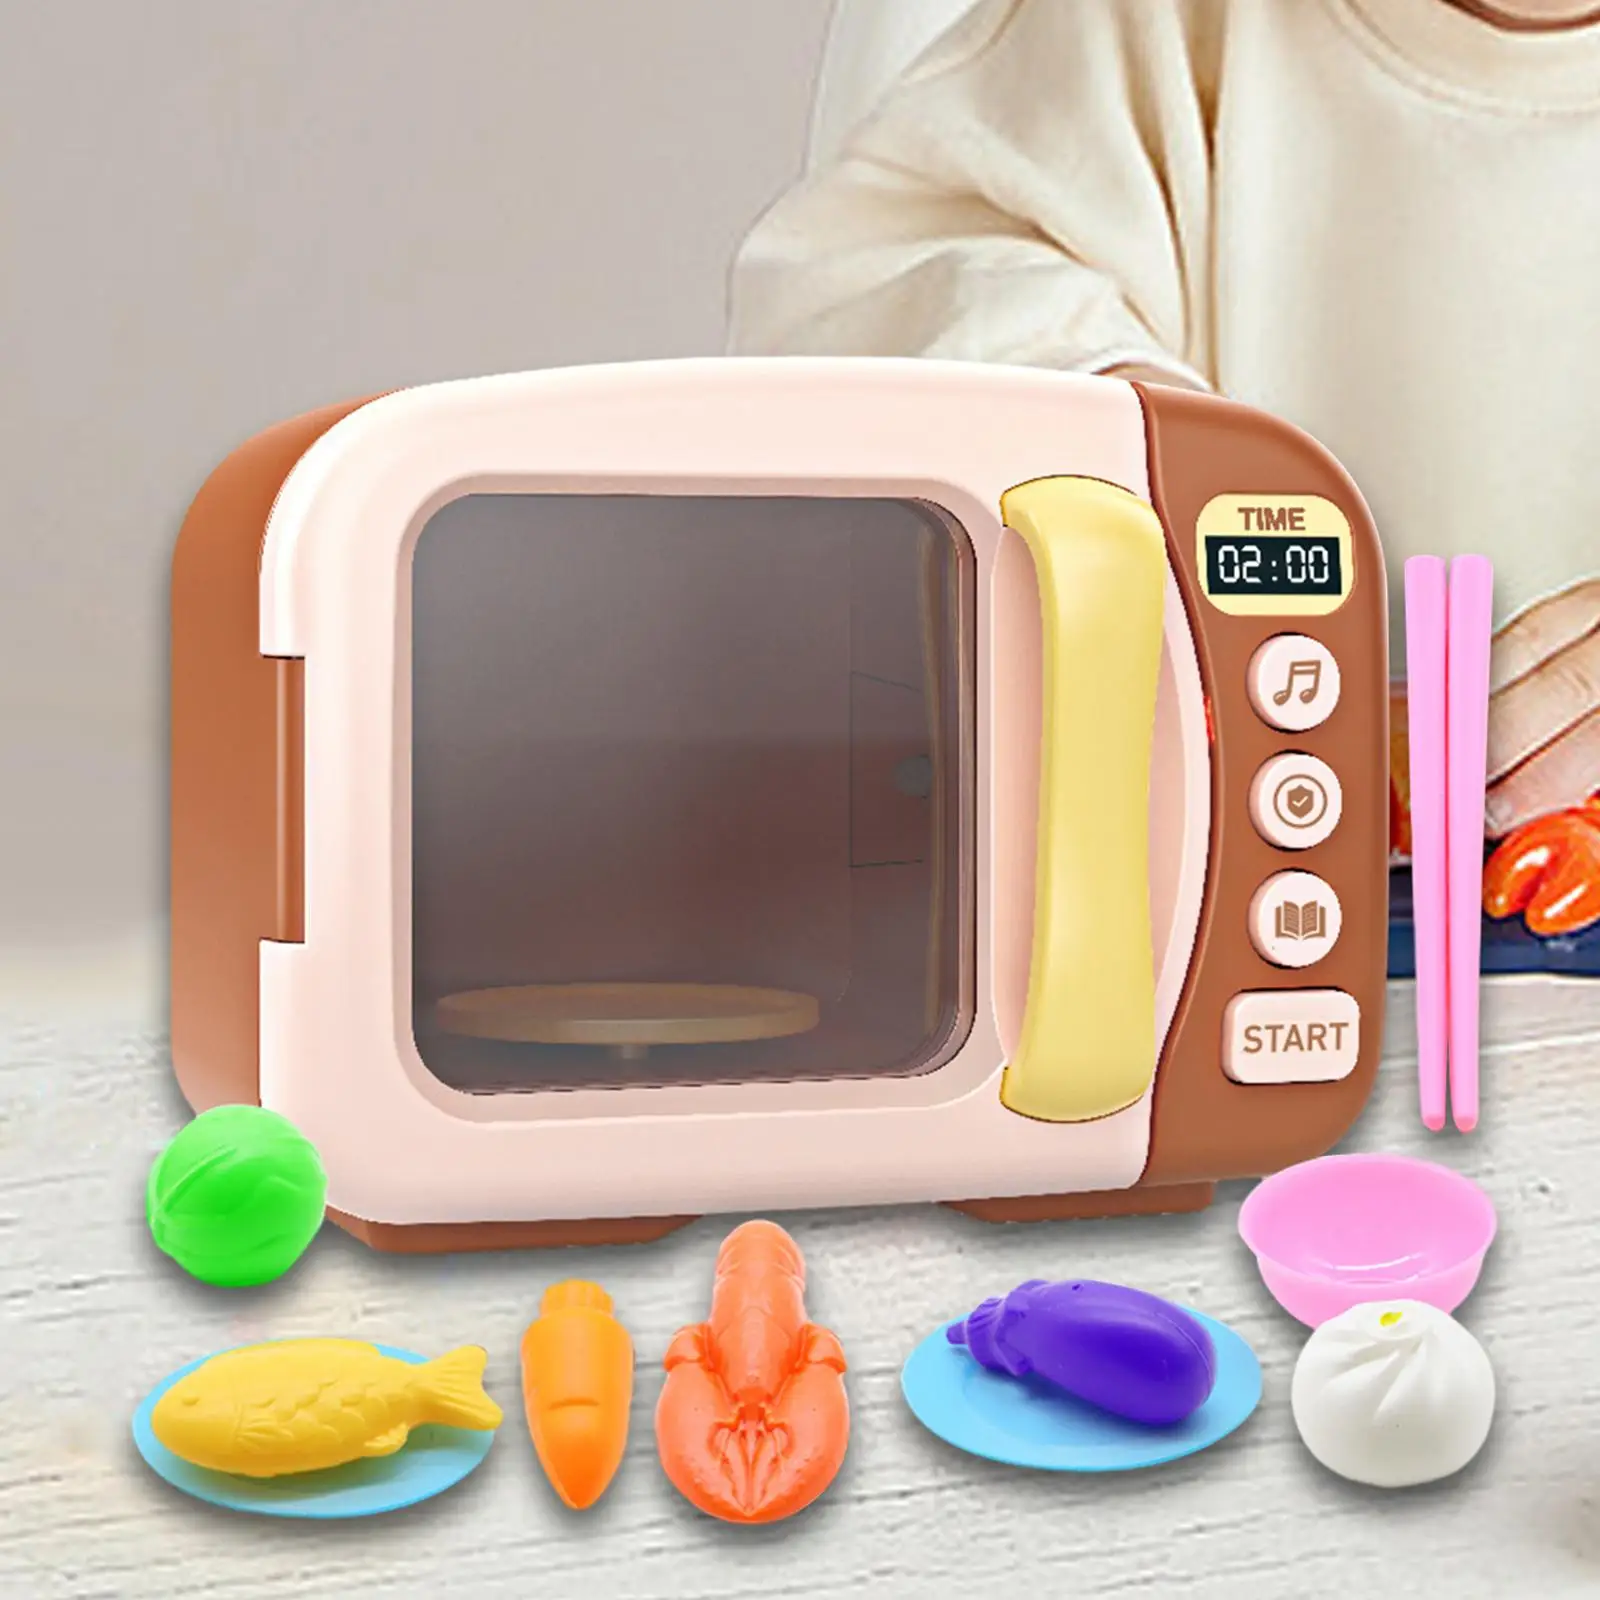 Microwave Kitchen Play Set Pretend Play Toy for Girls Boys Kids 3-8 Year Old